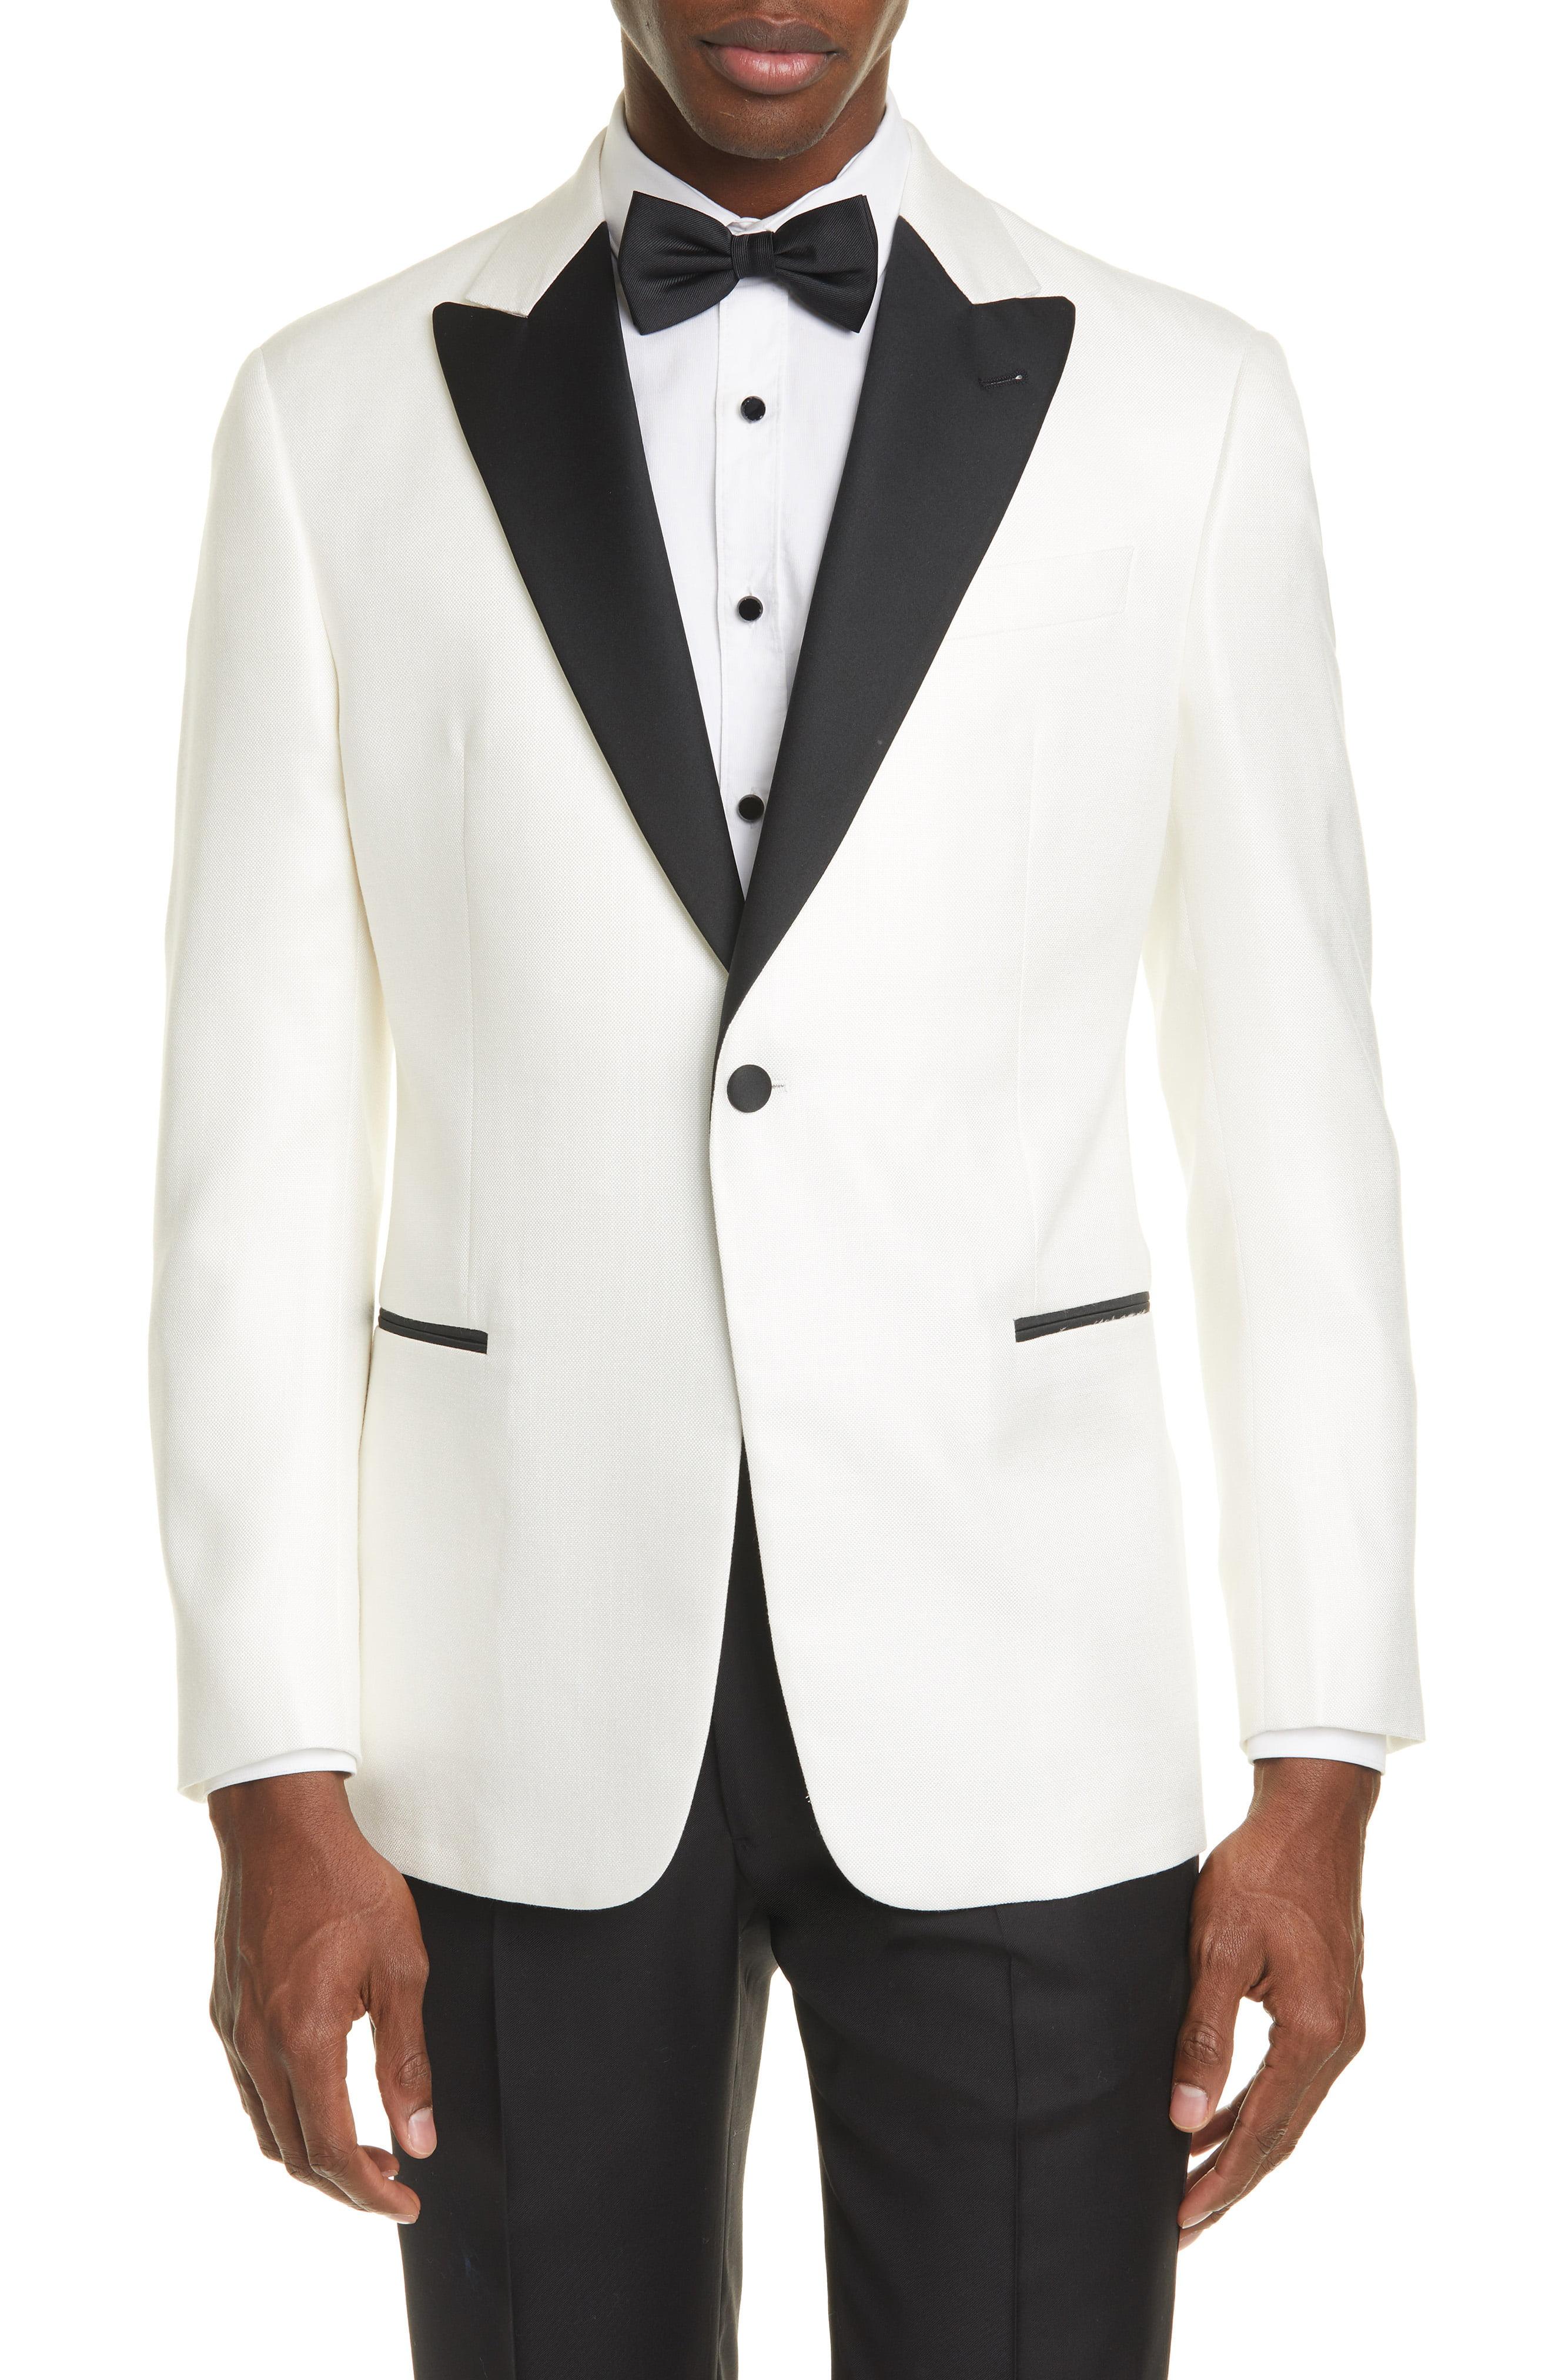 Emporio Armani Trim Fit Dinner Jacket in White for Men - Lyst